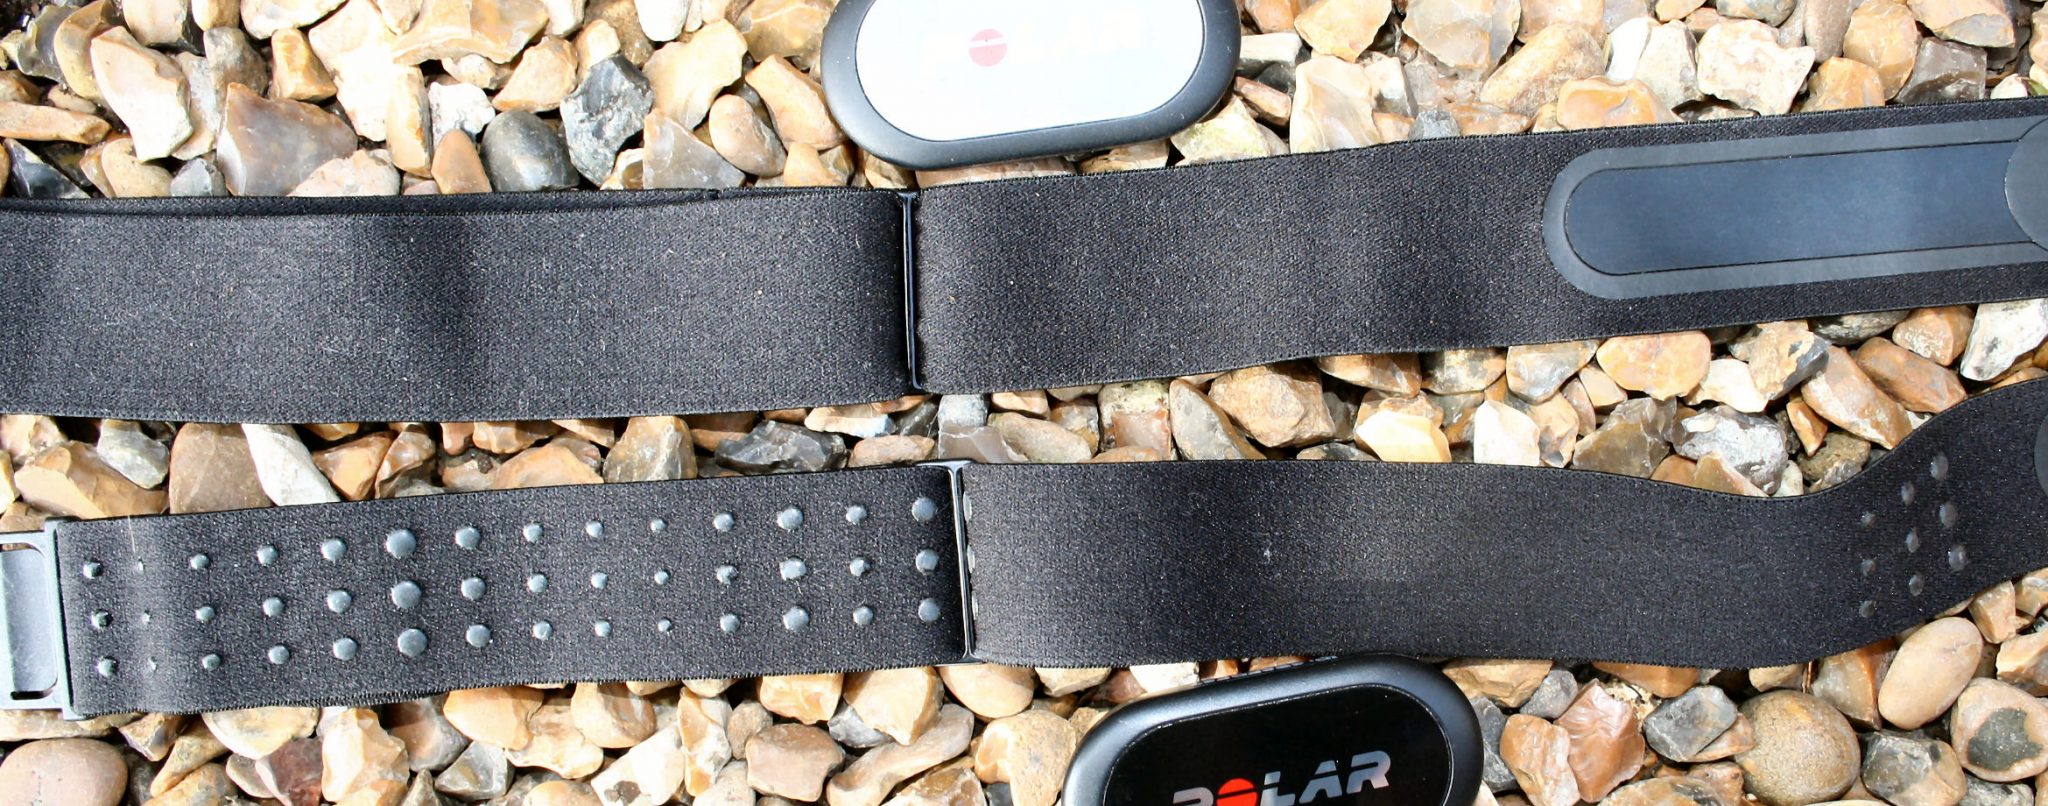 Polar H9 Review HRM chest strap H10 oh1 h7